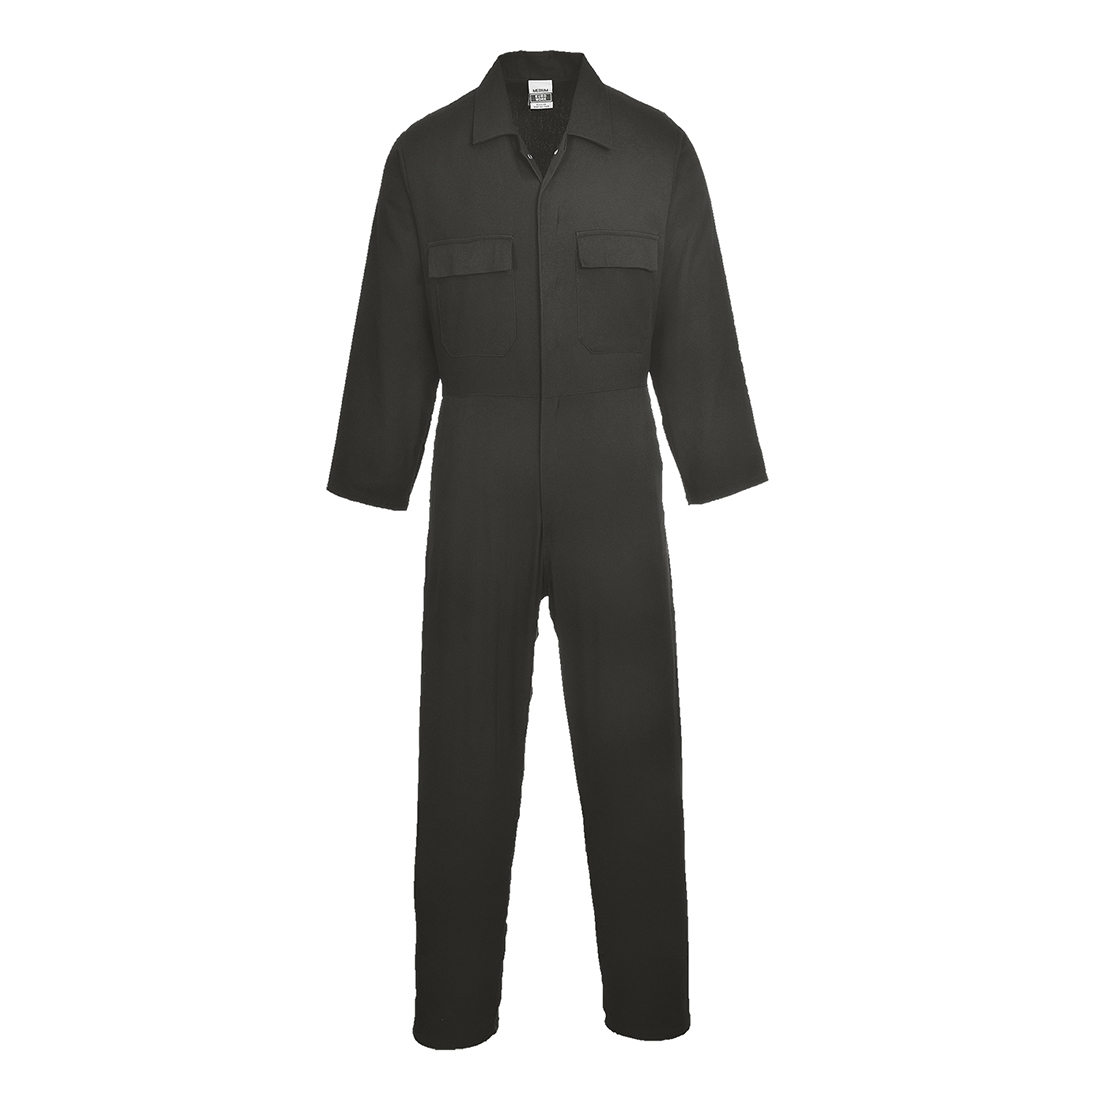  Popular Classic Strong Windproof Work Cotton Winter Coverall 